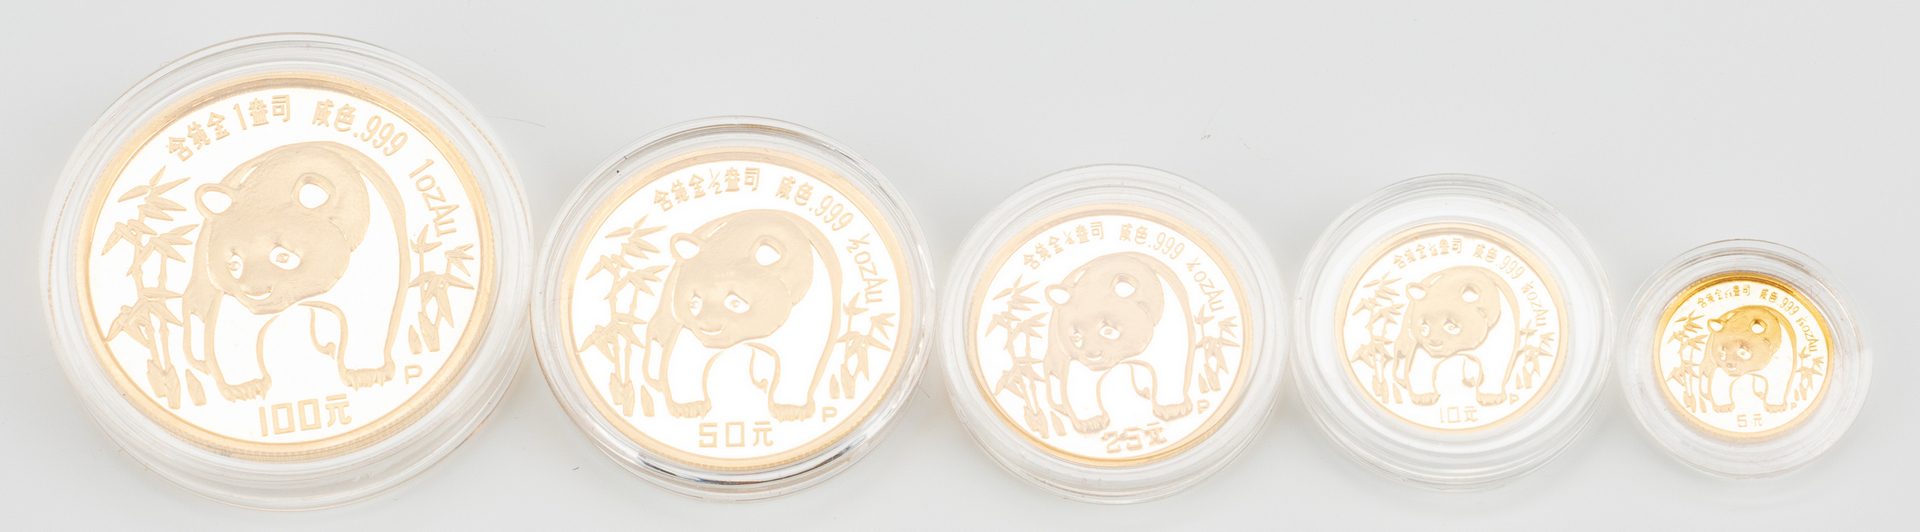 Lot 864: 1986 Chinese 5-Coin Gold Panda Proof Set